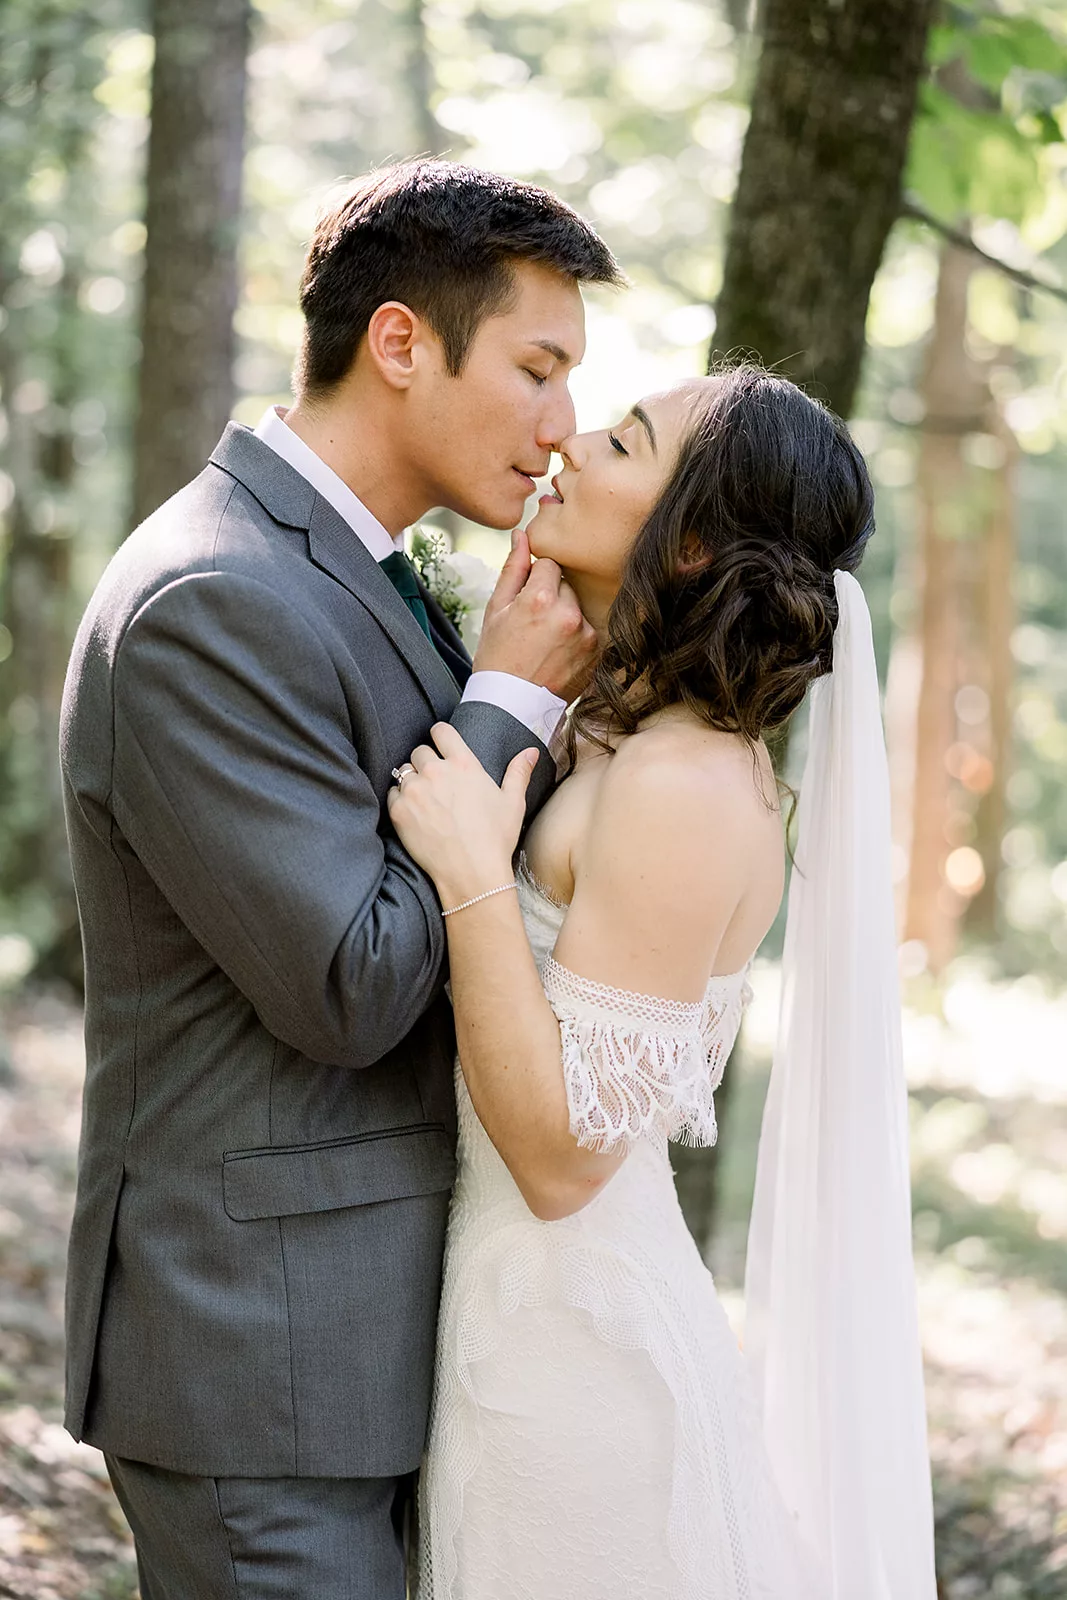 Newlyweds lean in for a kiss while standing in a forest at one of the Sustainable Wedding Venue